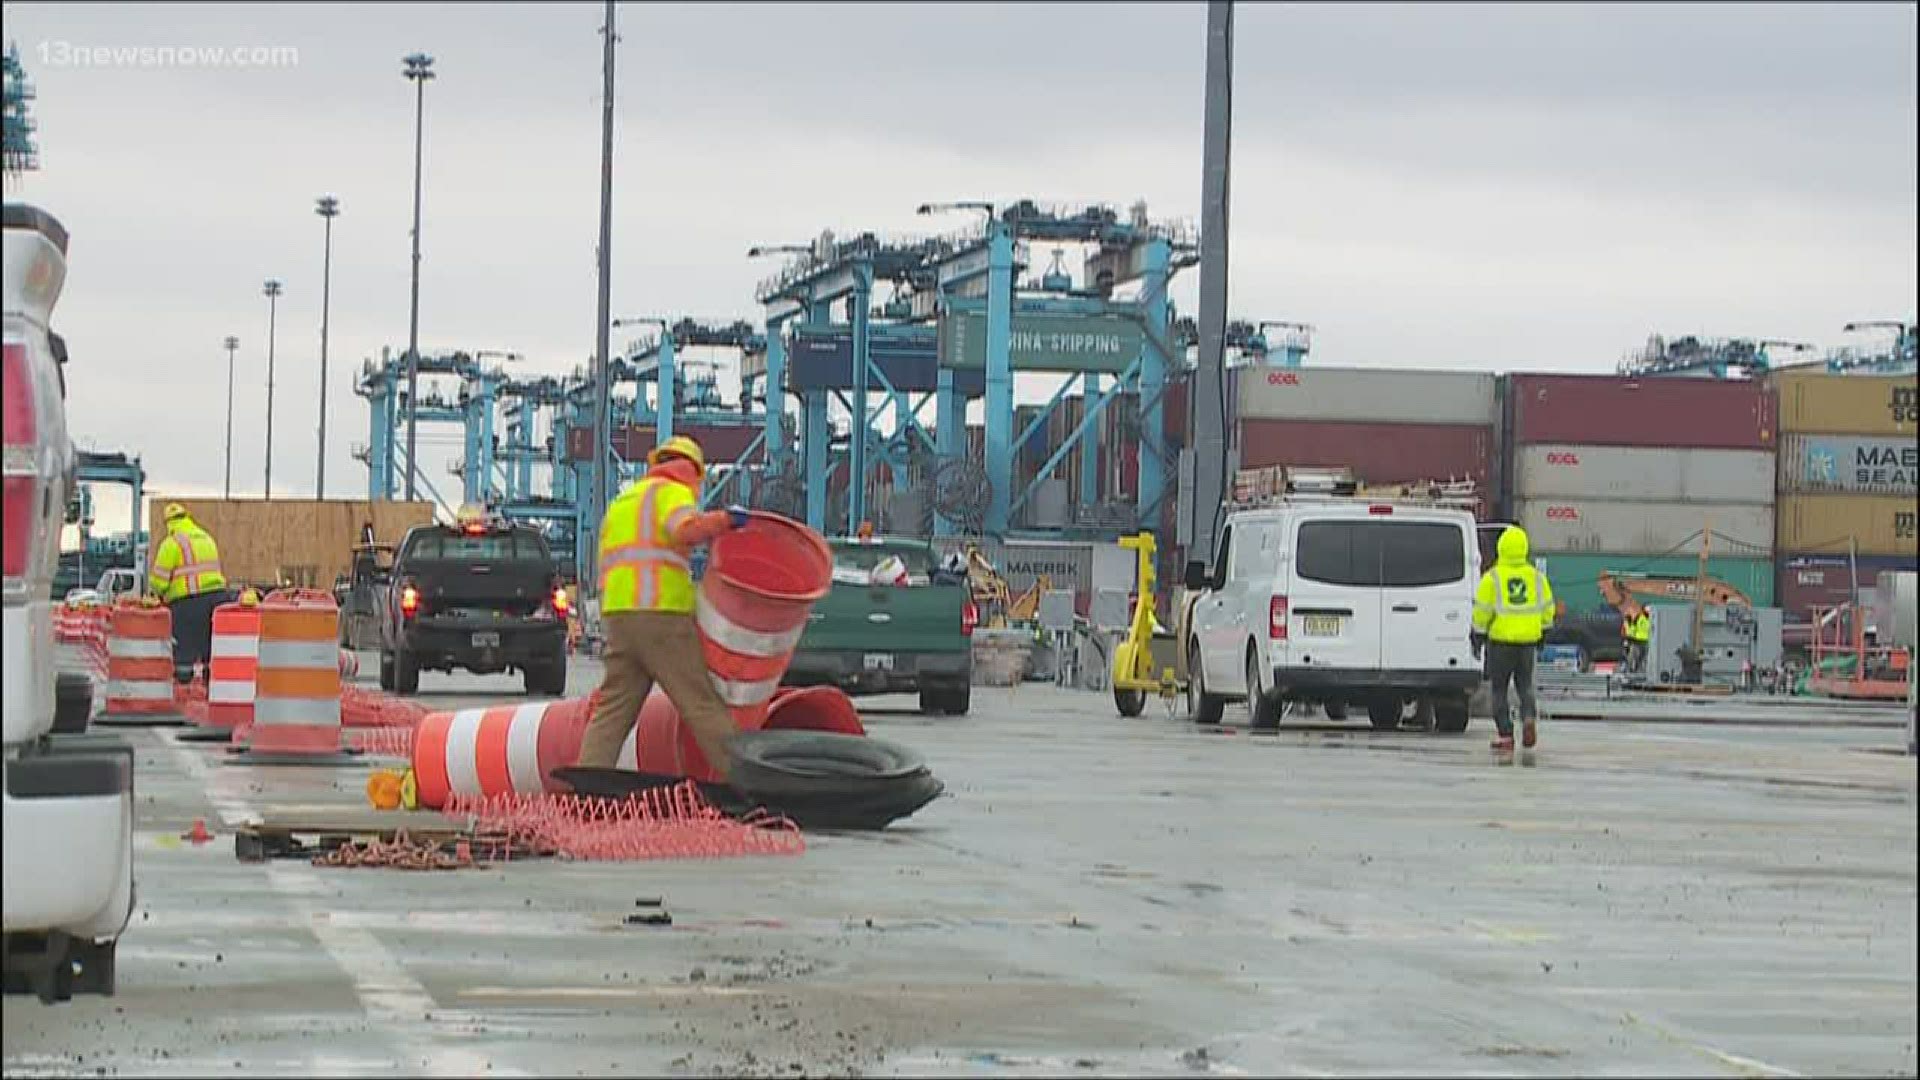 The Port of Virginia said its cargo volume was down 9 percent when compared to March of 2019.